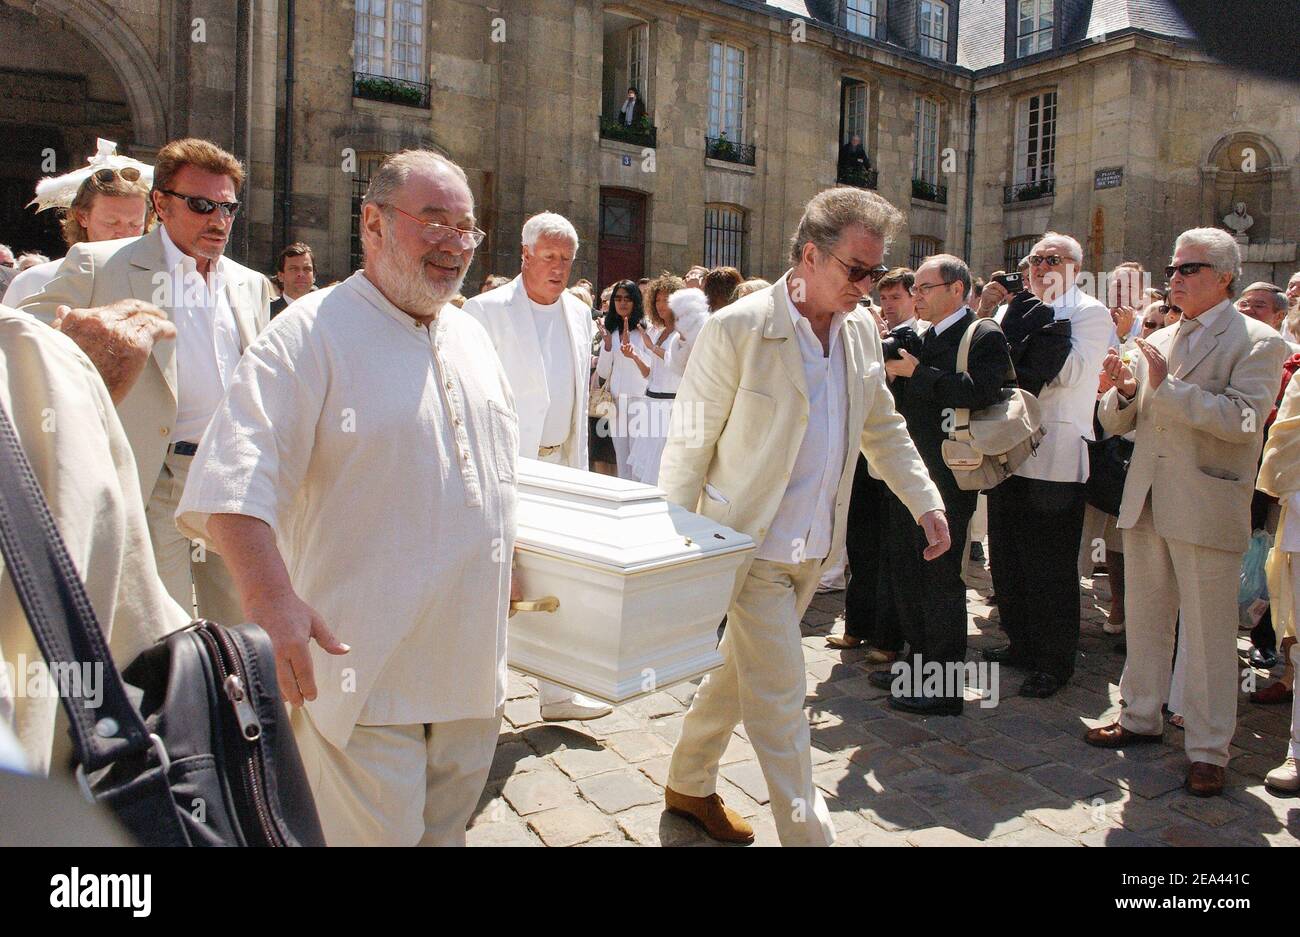 French singers Carlos, Johnny Hallyday, Eddy Mitchell and TV producer Stephane Collaro pay their last tribute to French music producer Eddie Barclay in Paris on May 18, 2005. Photo by Mousse-Gorassini/ABACA. Stock Photo